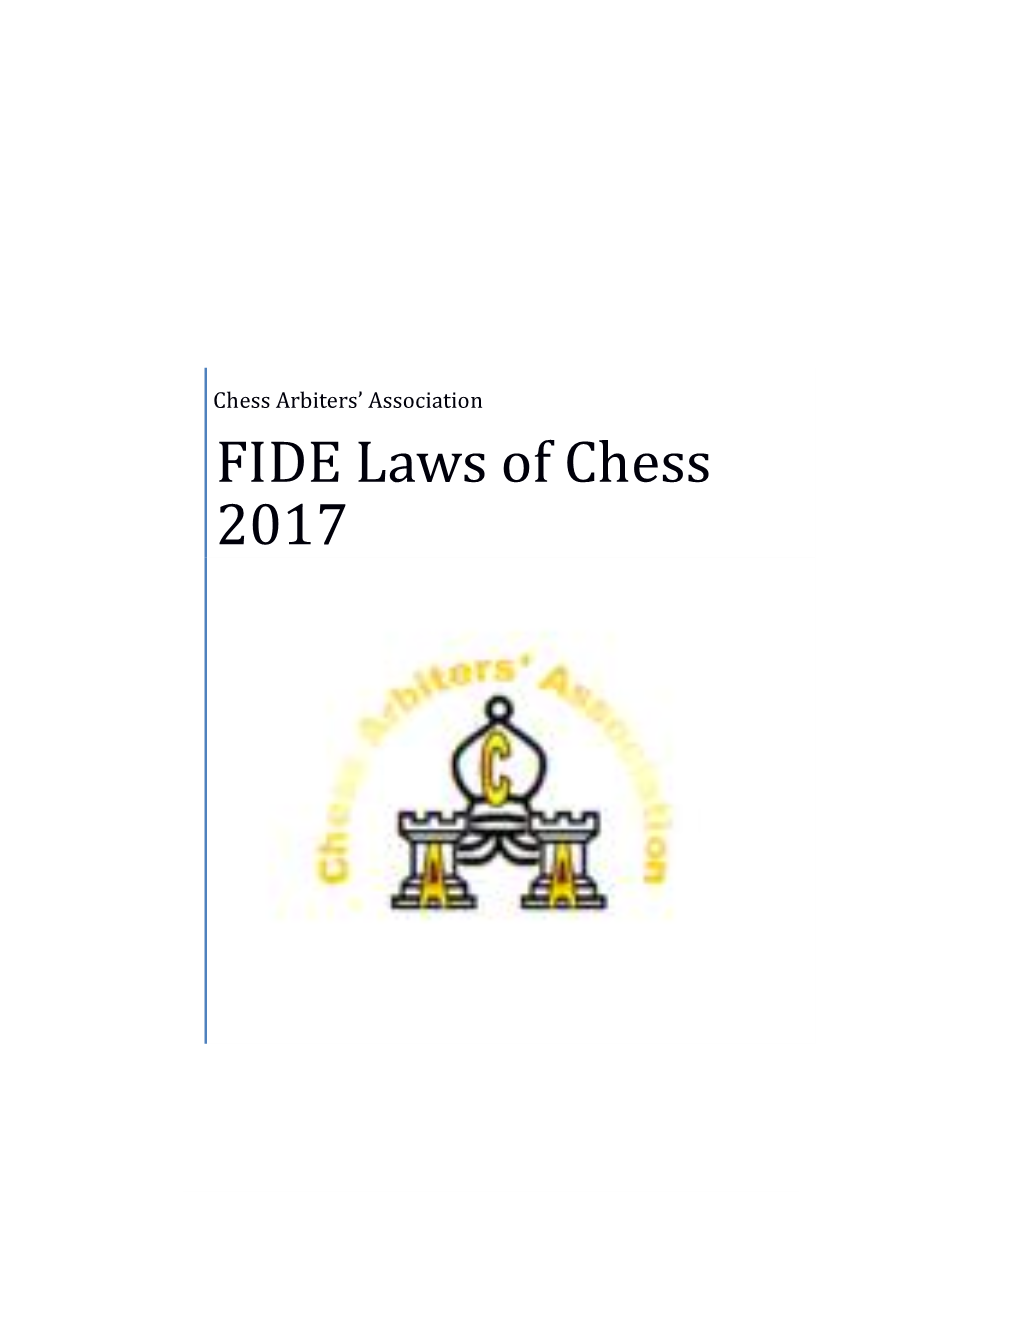 FIDE Laws of Chess 2017 FIDE LAWS of CHESS TAKING EFFECT from 1 JULY 2017